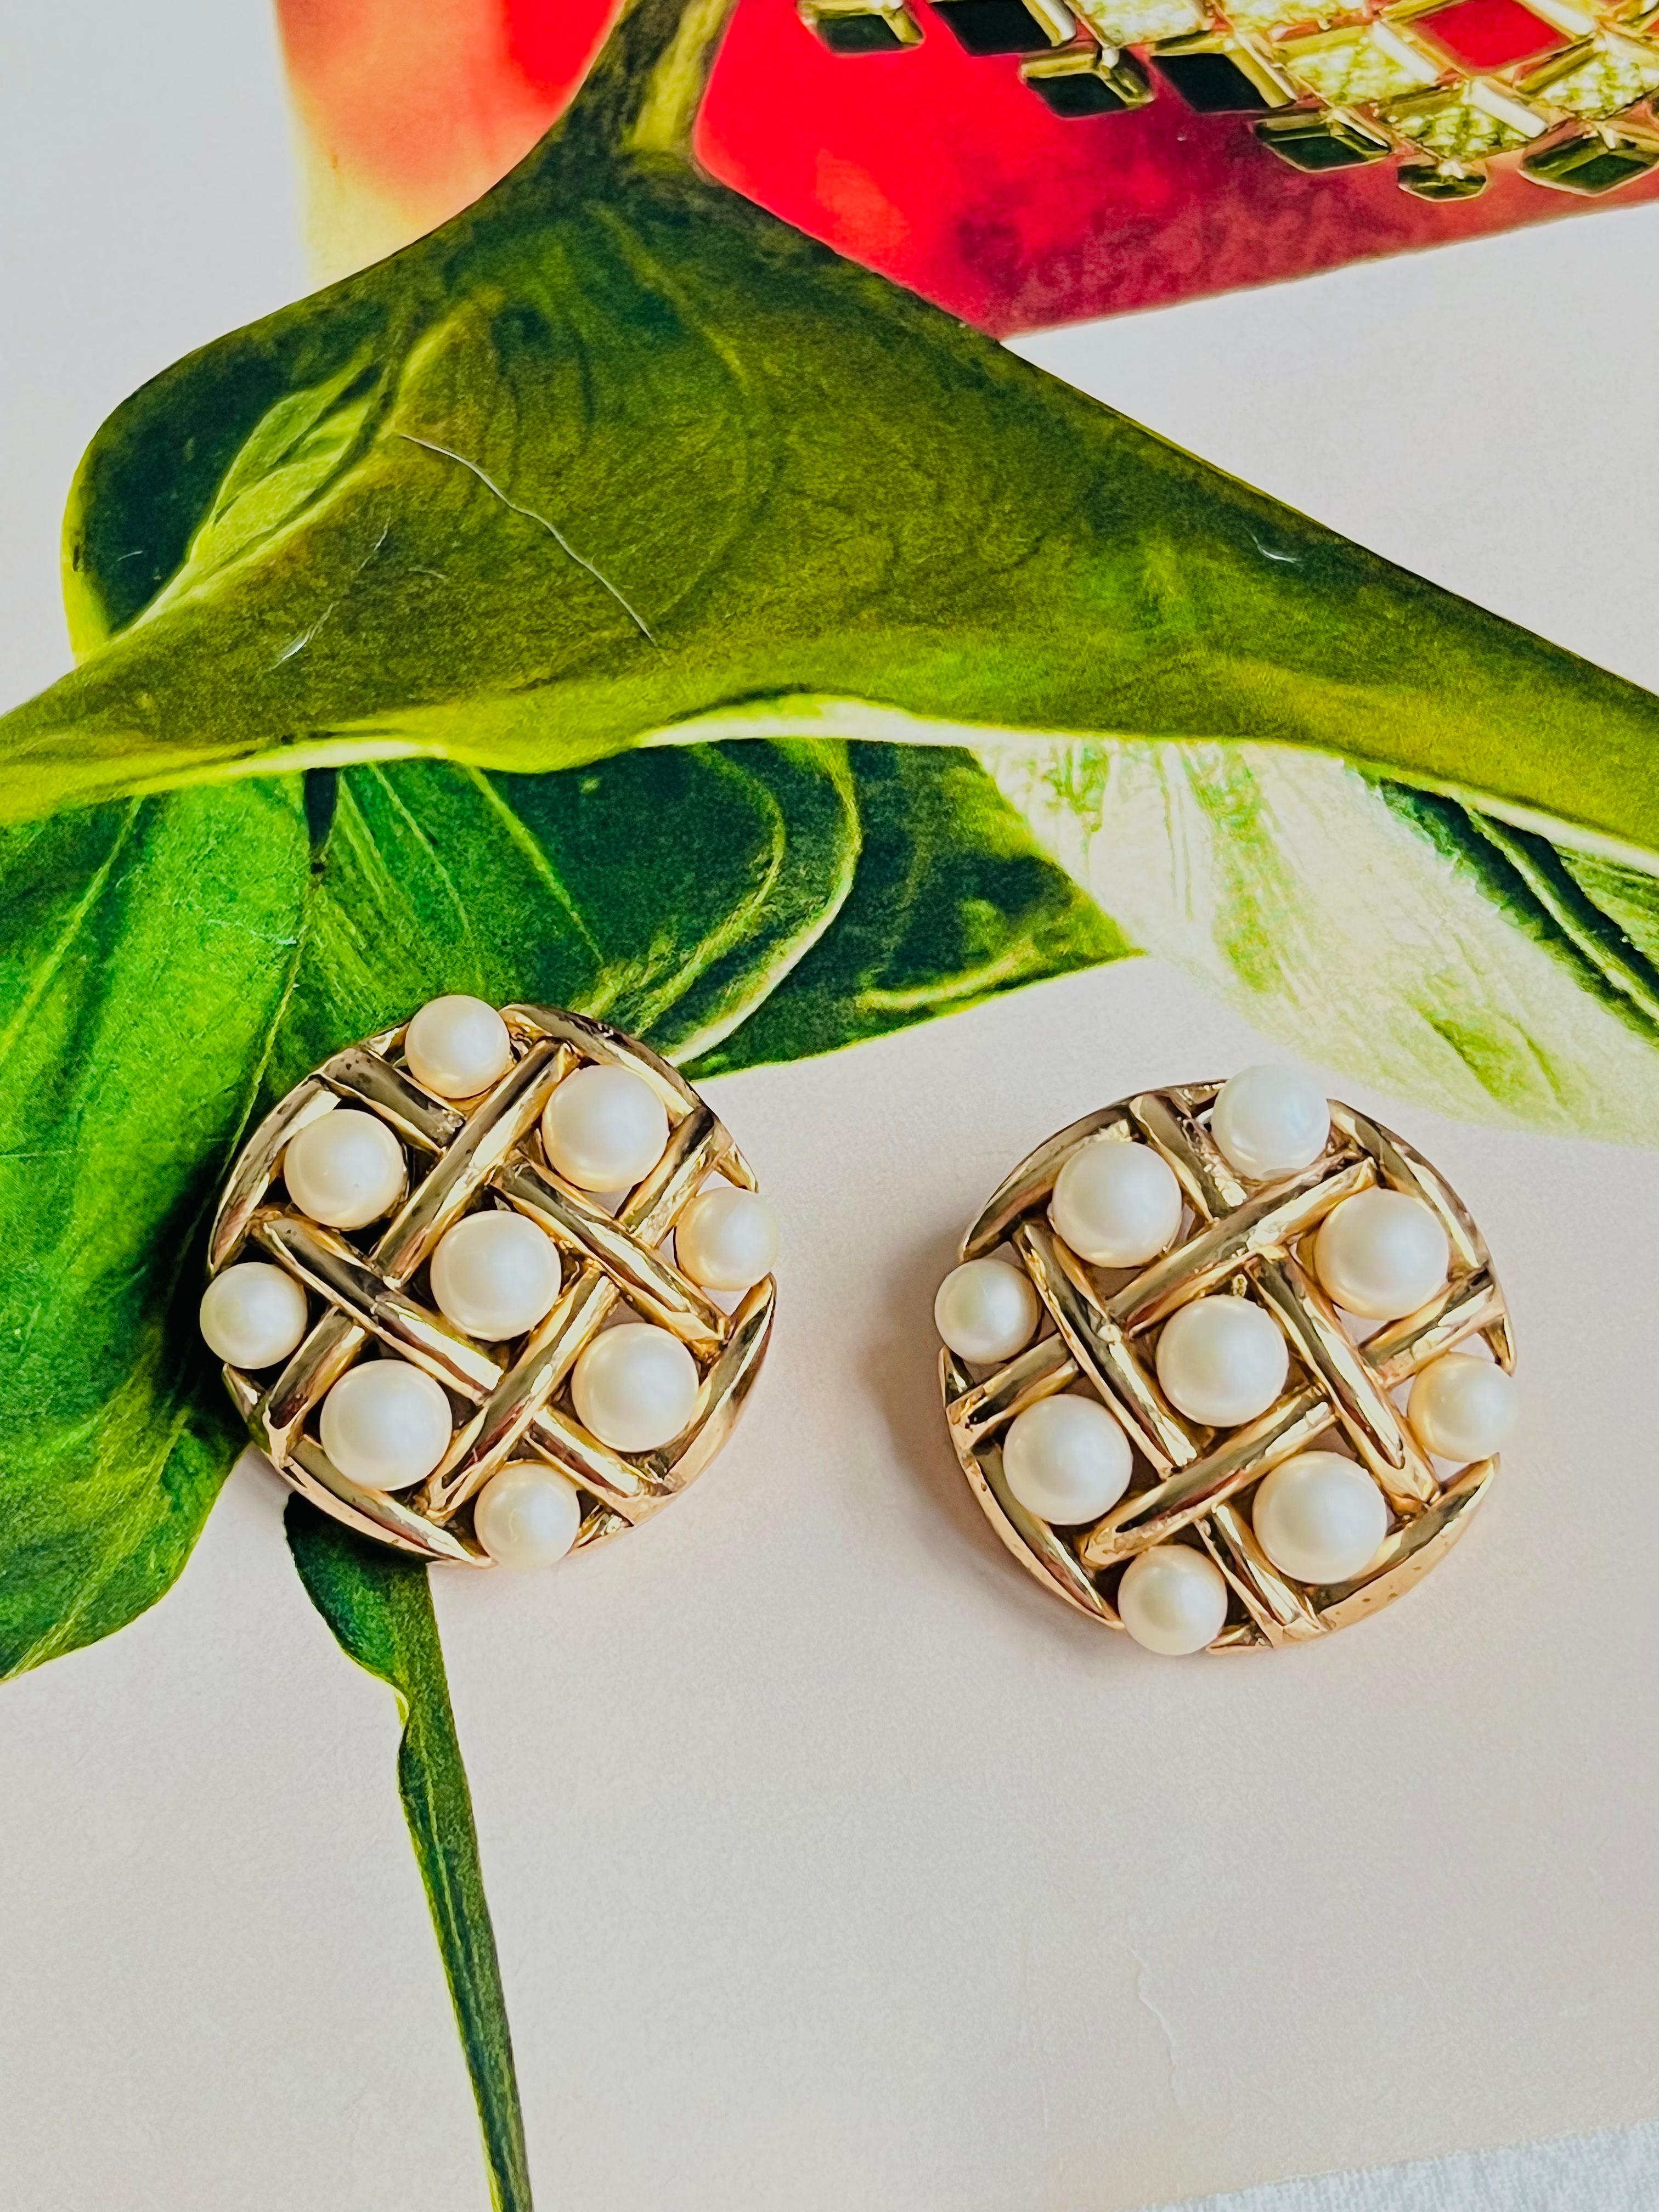 Crown Trifari 1950 Round Circle White Pearls Openwork Criss Cross Chunky Clip Earrings, Gold Tone

Very good condition. Some light colour loss or scratches at sides and back, since over 70 years. 

A very beautiful earrings, signed at the back. 100%